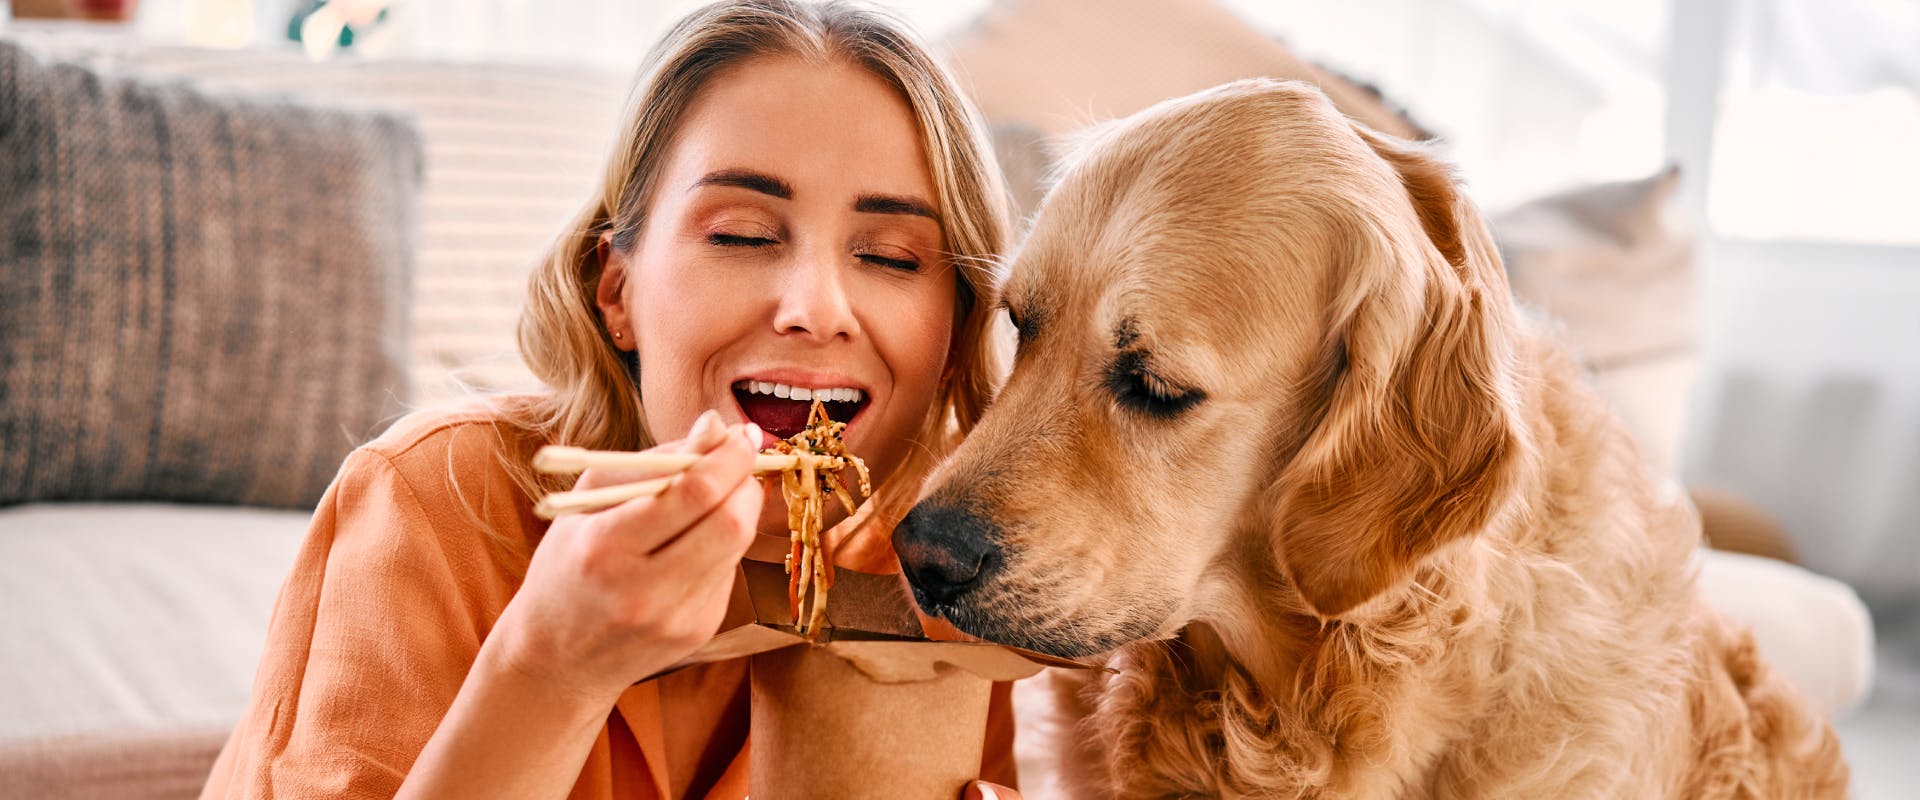 a woman using chopsticks to eat noodles with a curious golden retriever right next to her face sniffing the noodles